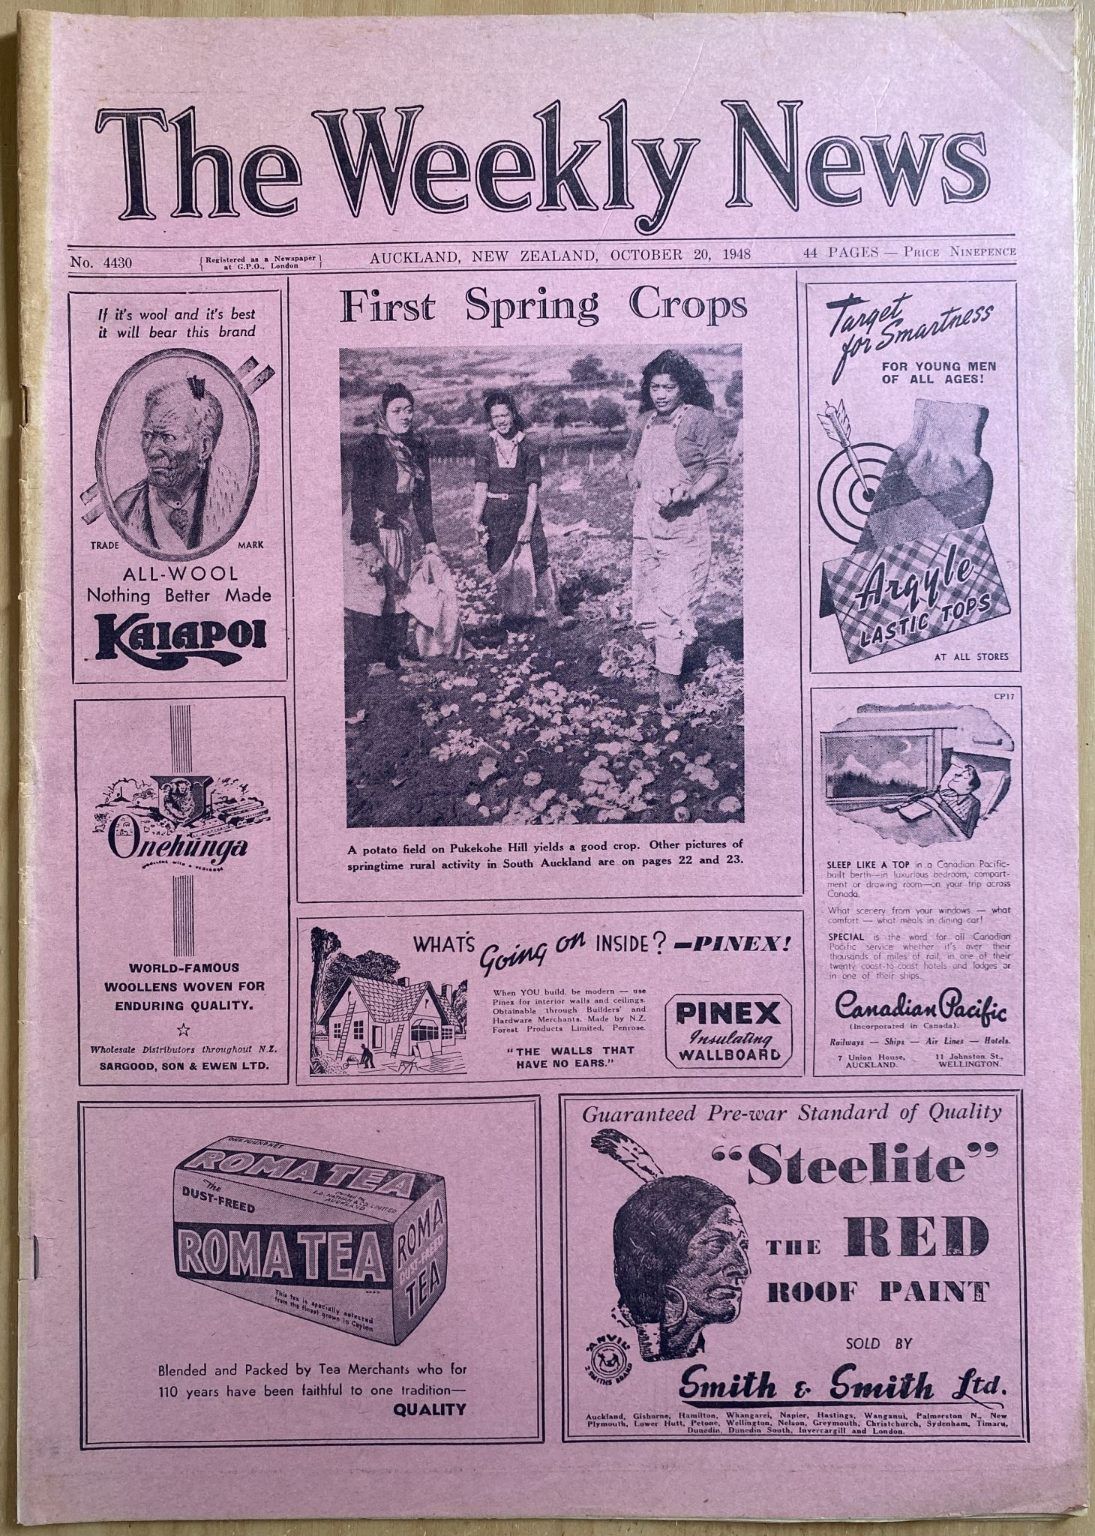 OLD NEWSPAPER: The Weekly News - No. 4430, 20 October 1948